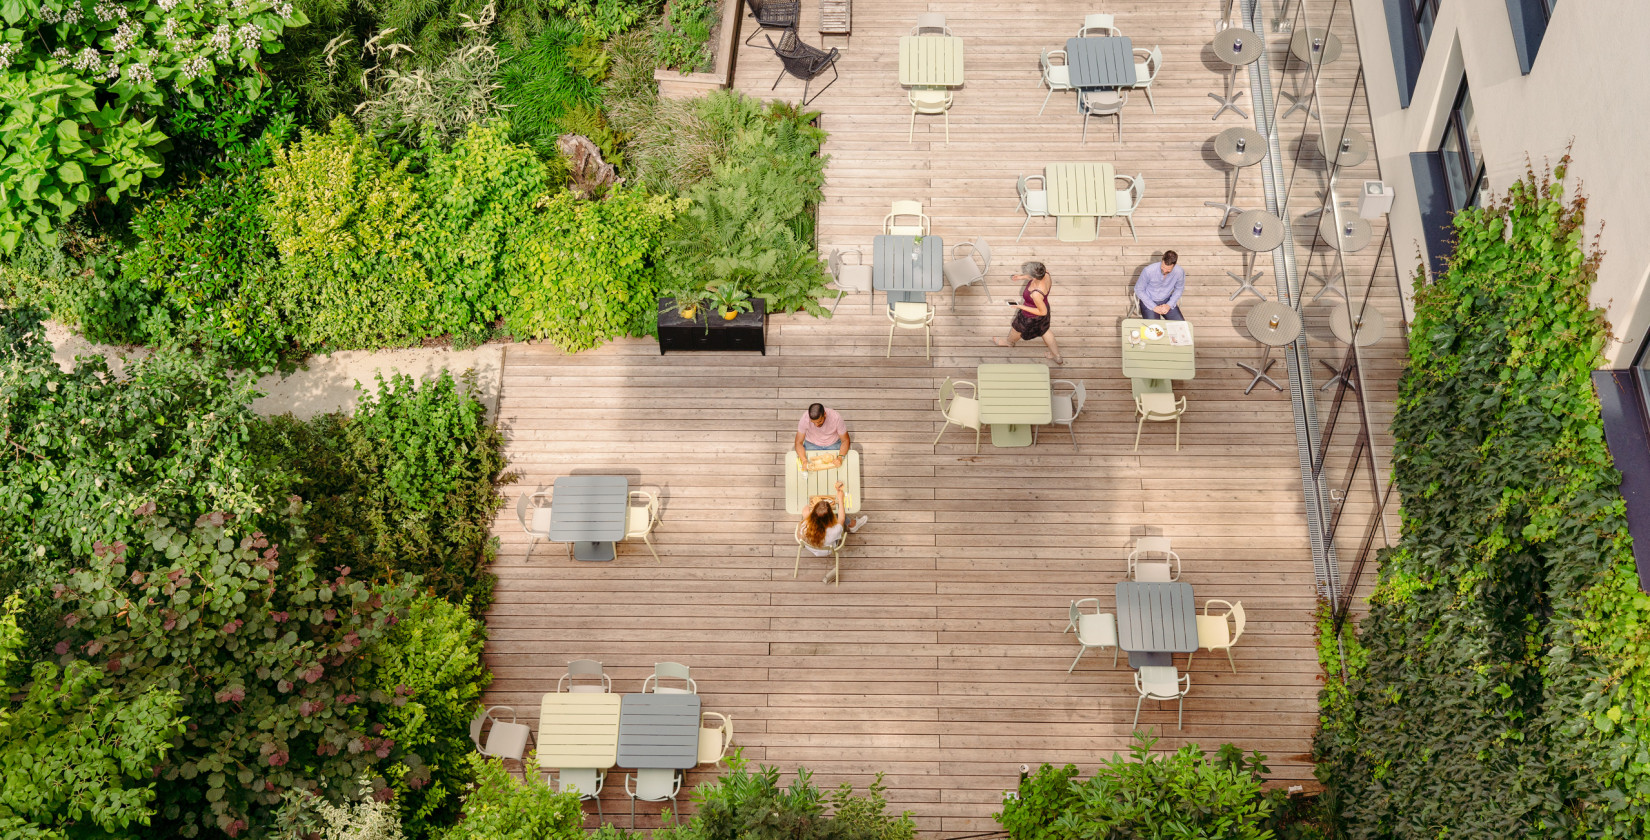 Schani's garden, a green oasis in the middle of the Vienna from the bird's eye view